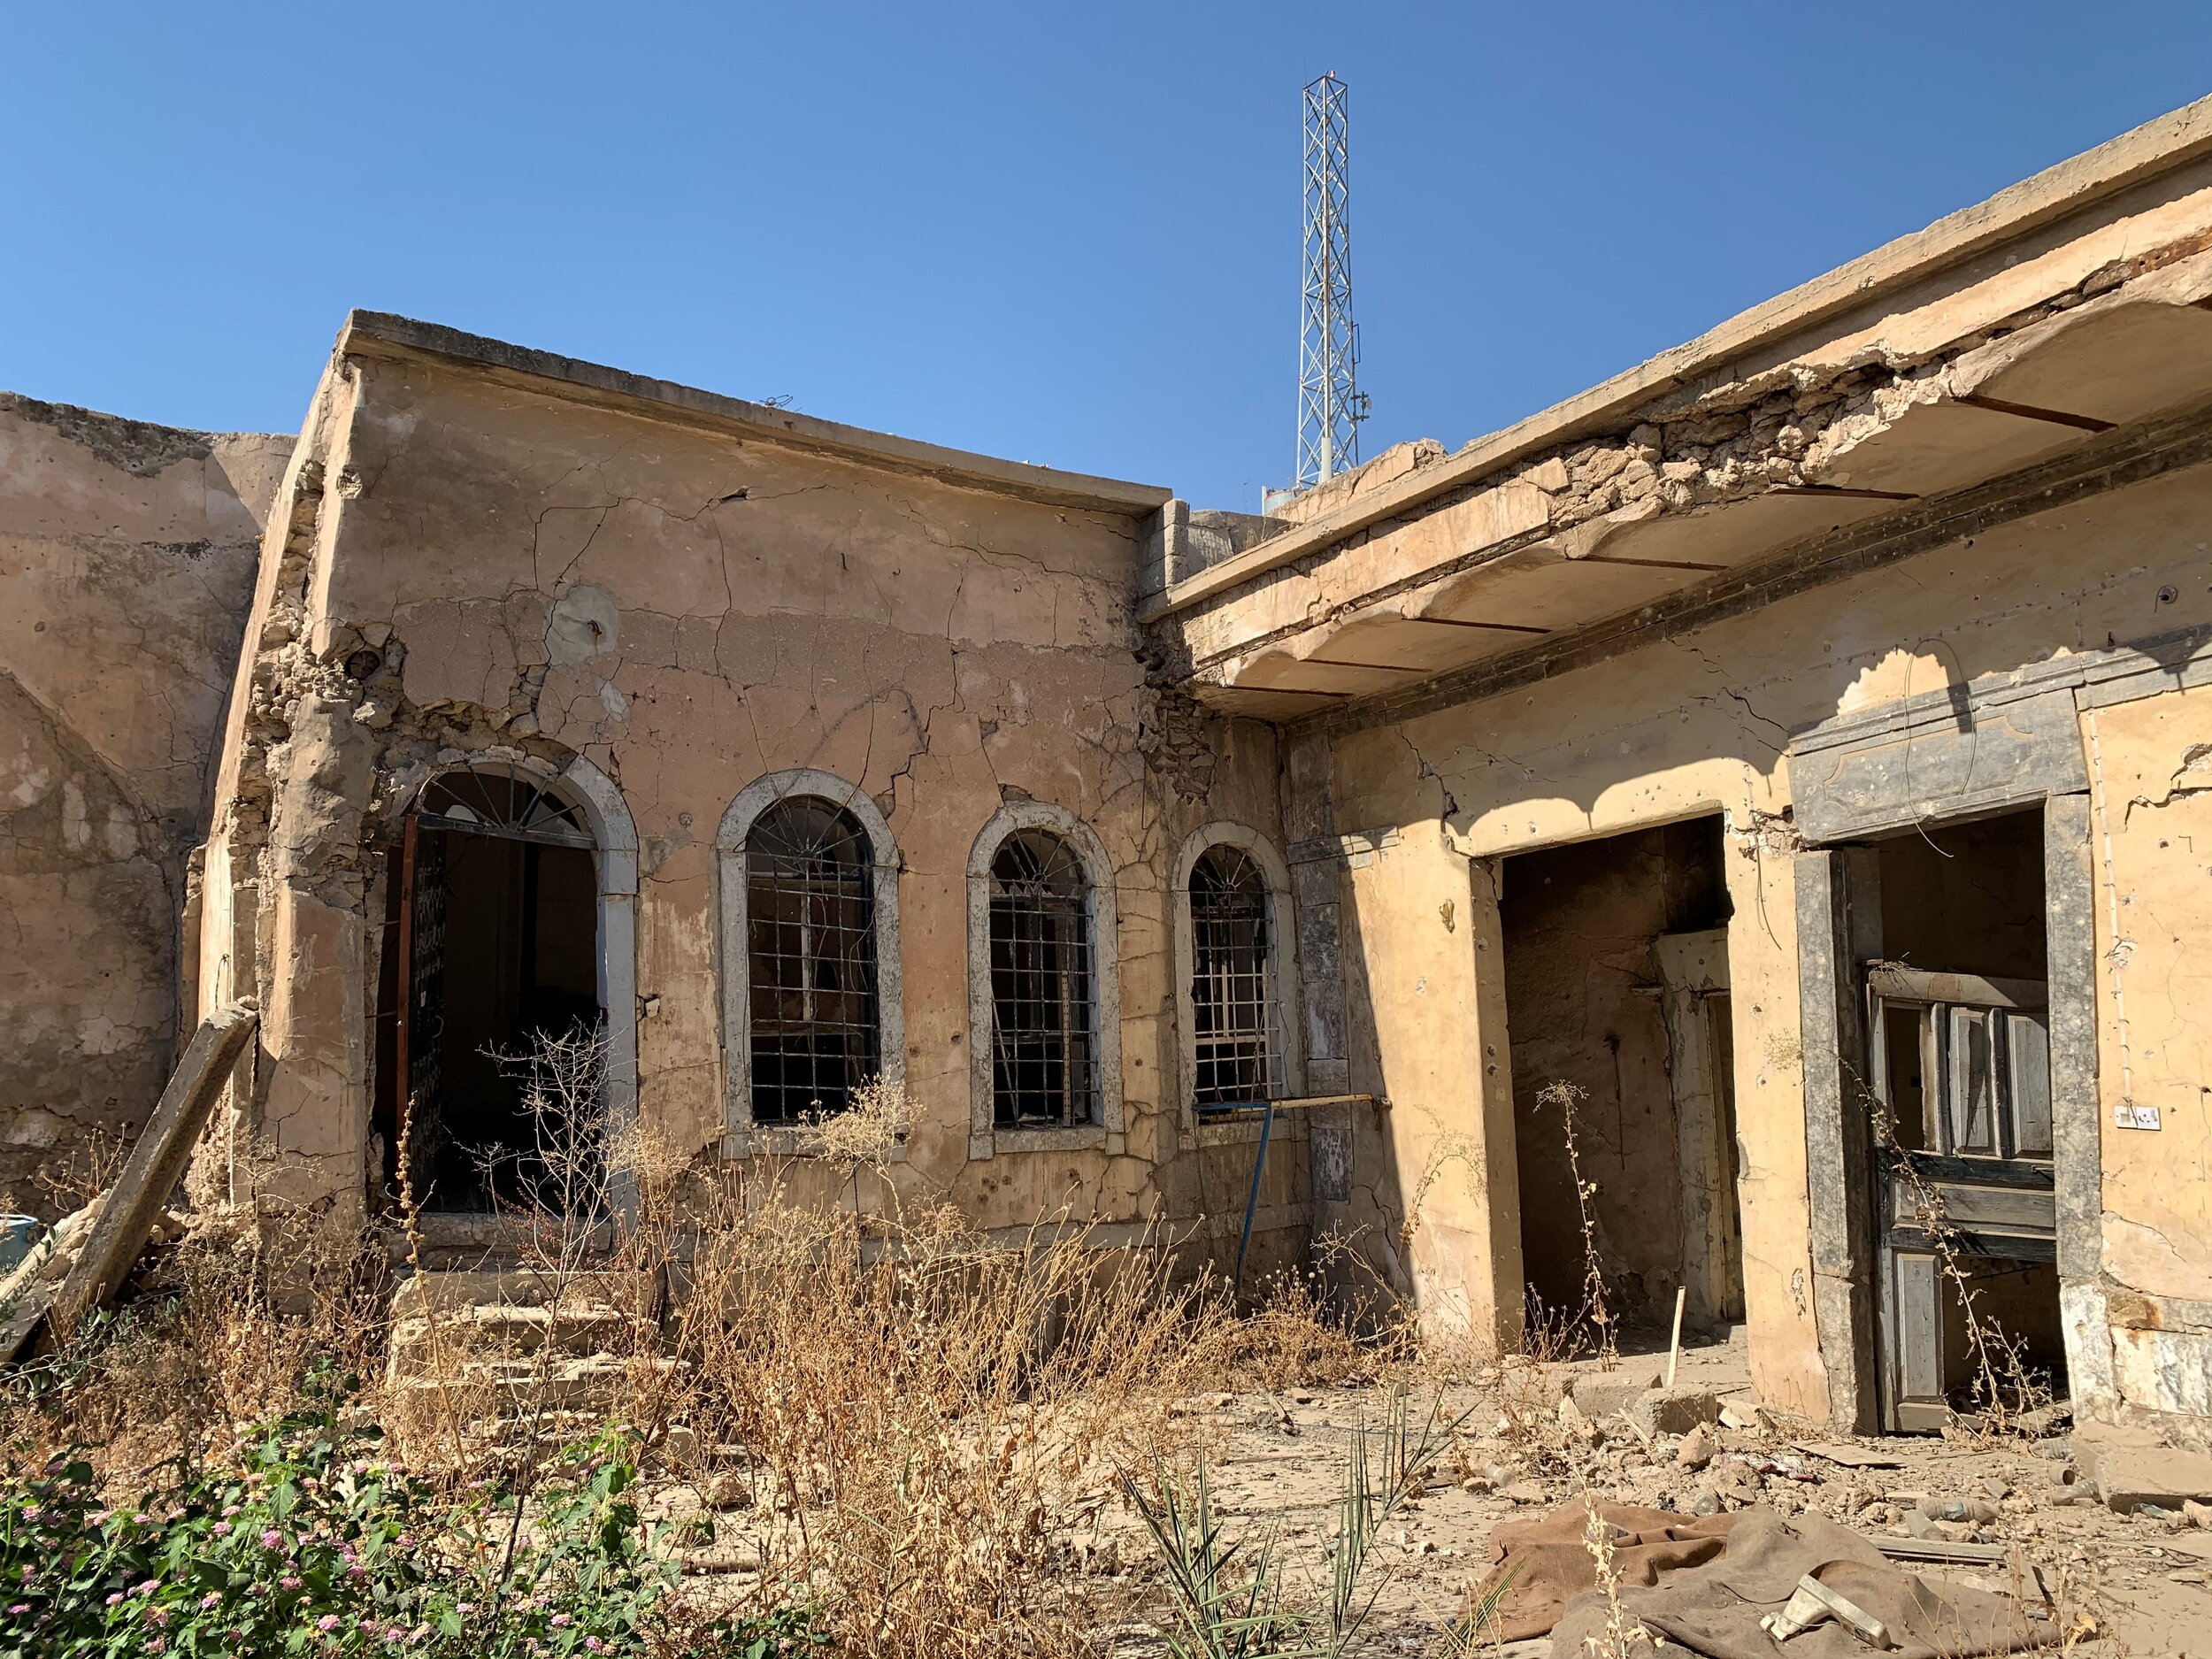  Mosul Church: “struck down, but not destroyed...” 